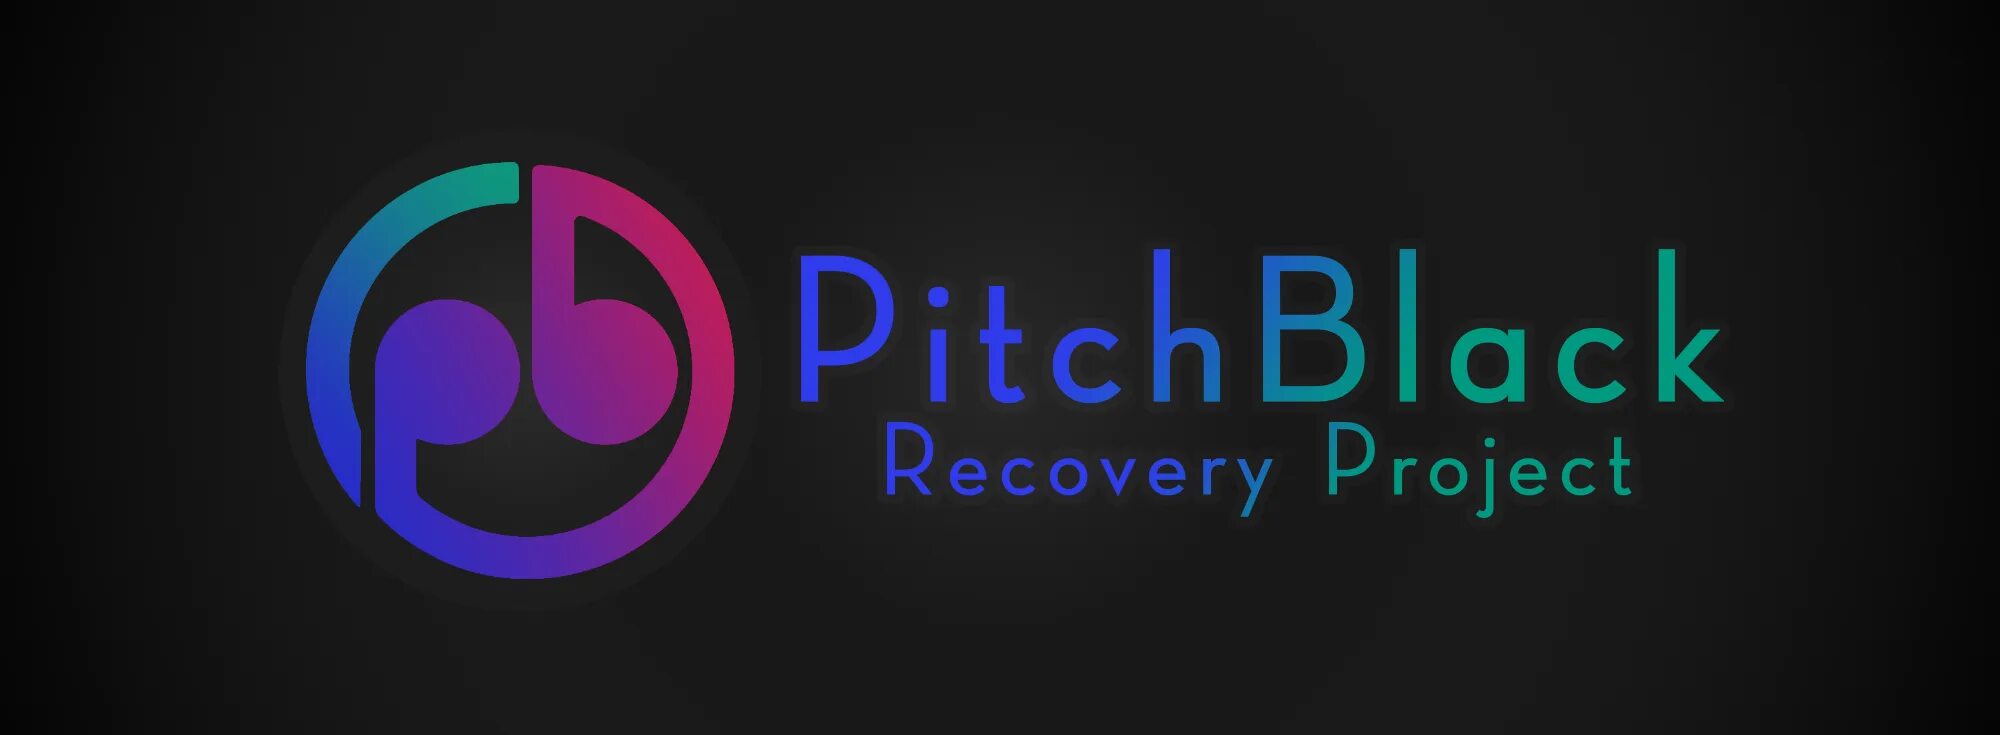 Recover m. PITCHBLACK Recovery. Pitch Black Recovery Project. PBRP рекавери. PITCHBLACK Recovery Project рекавери.